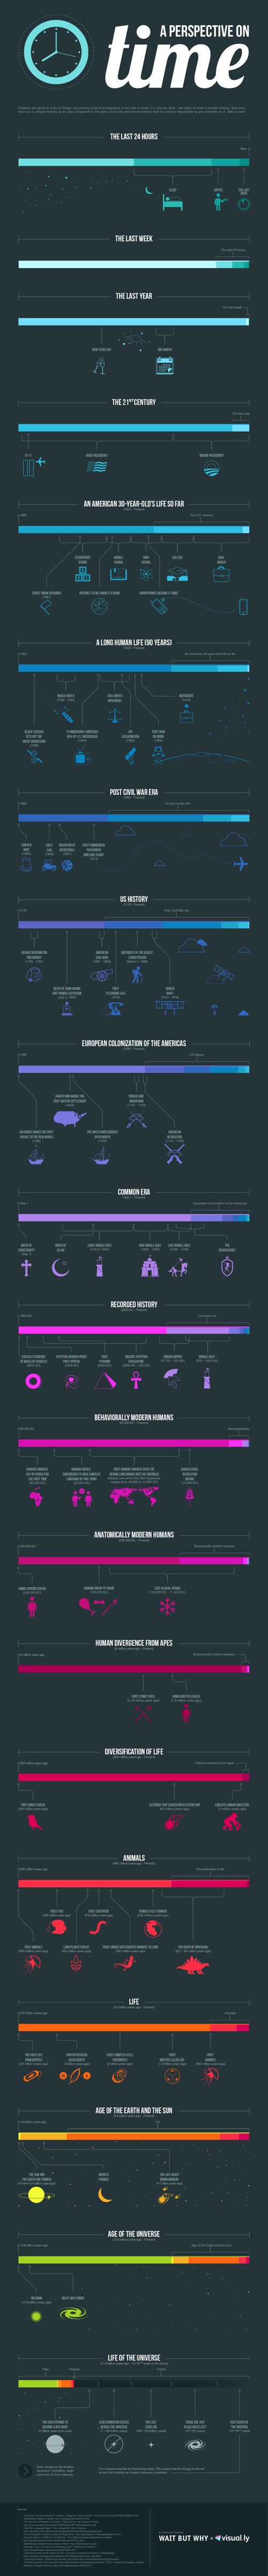 A Perspective on Time infographic